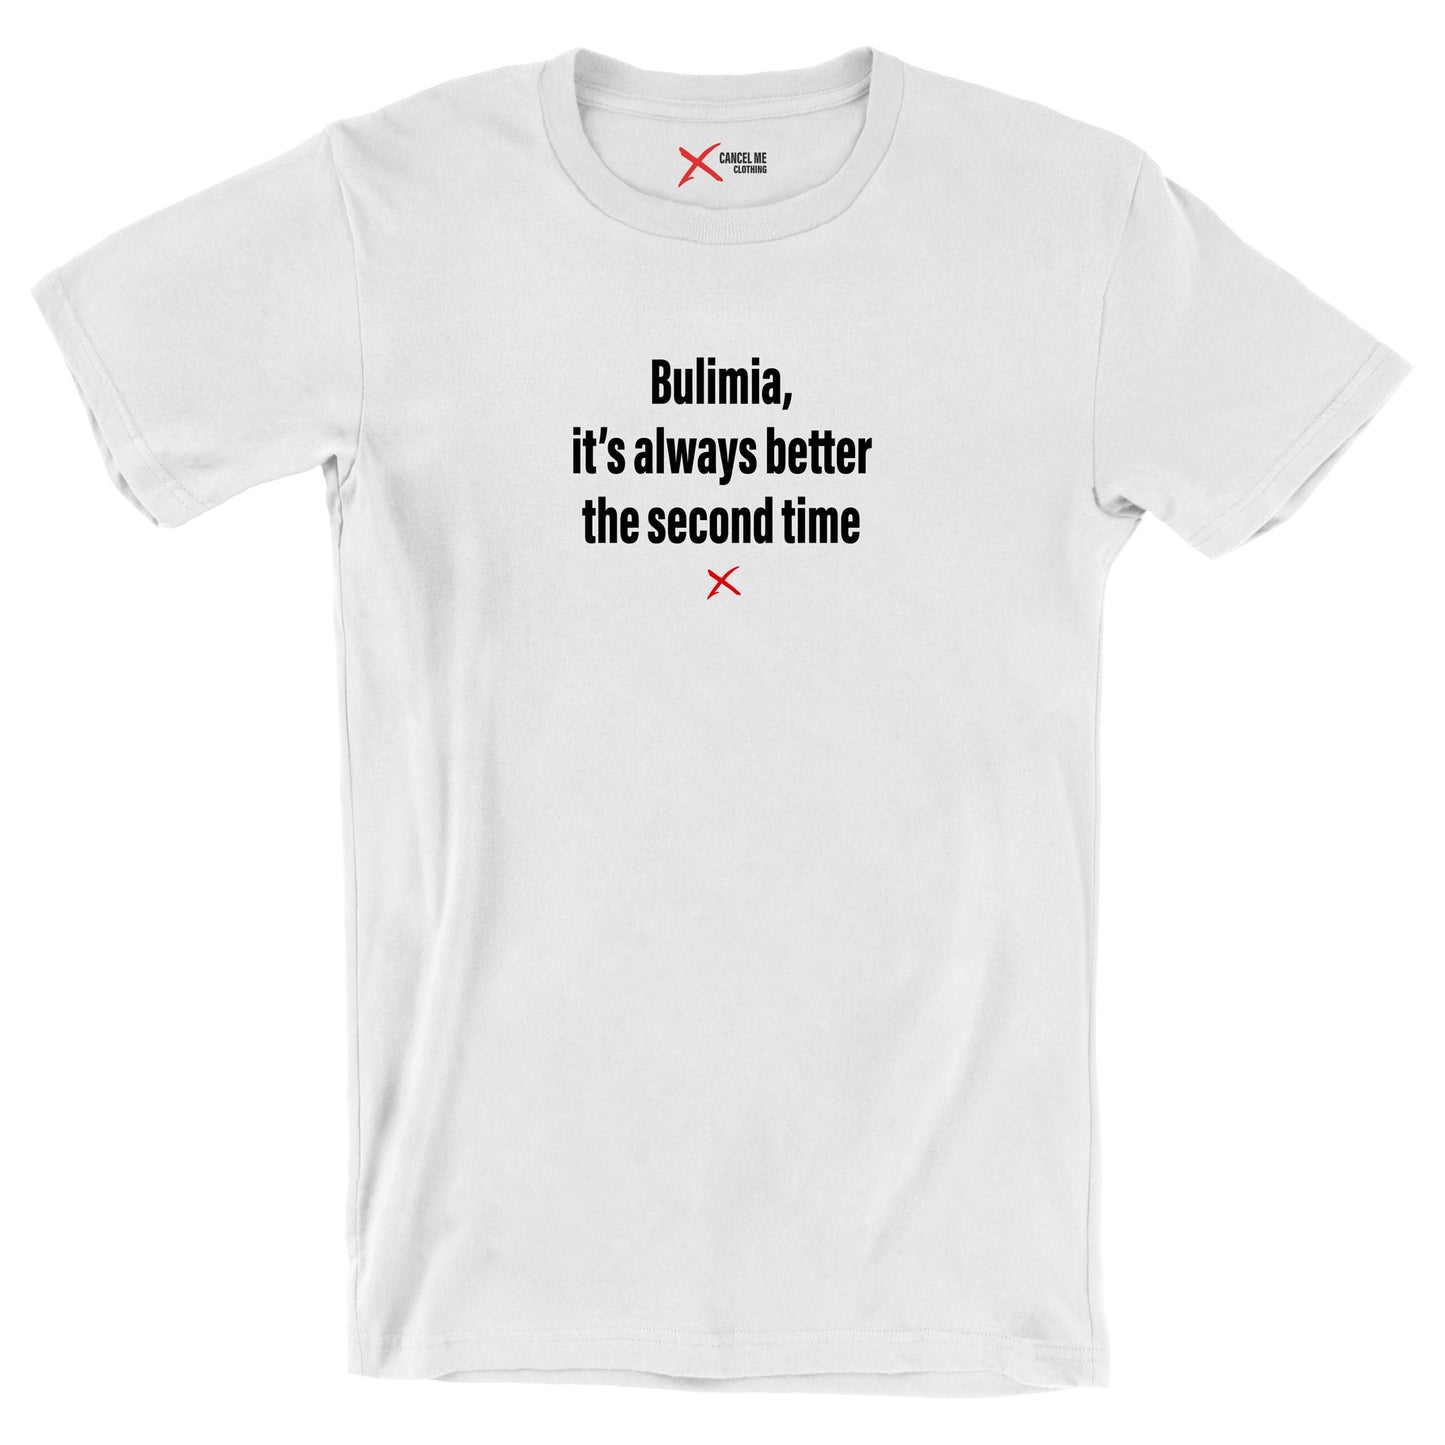 Bulimia, it's always better the second time - Shirt